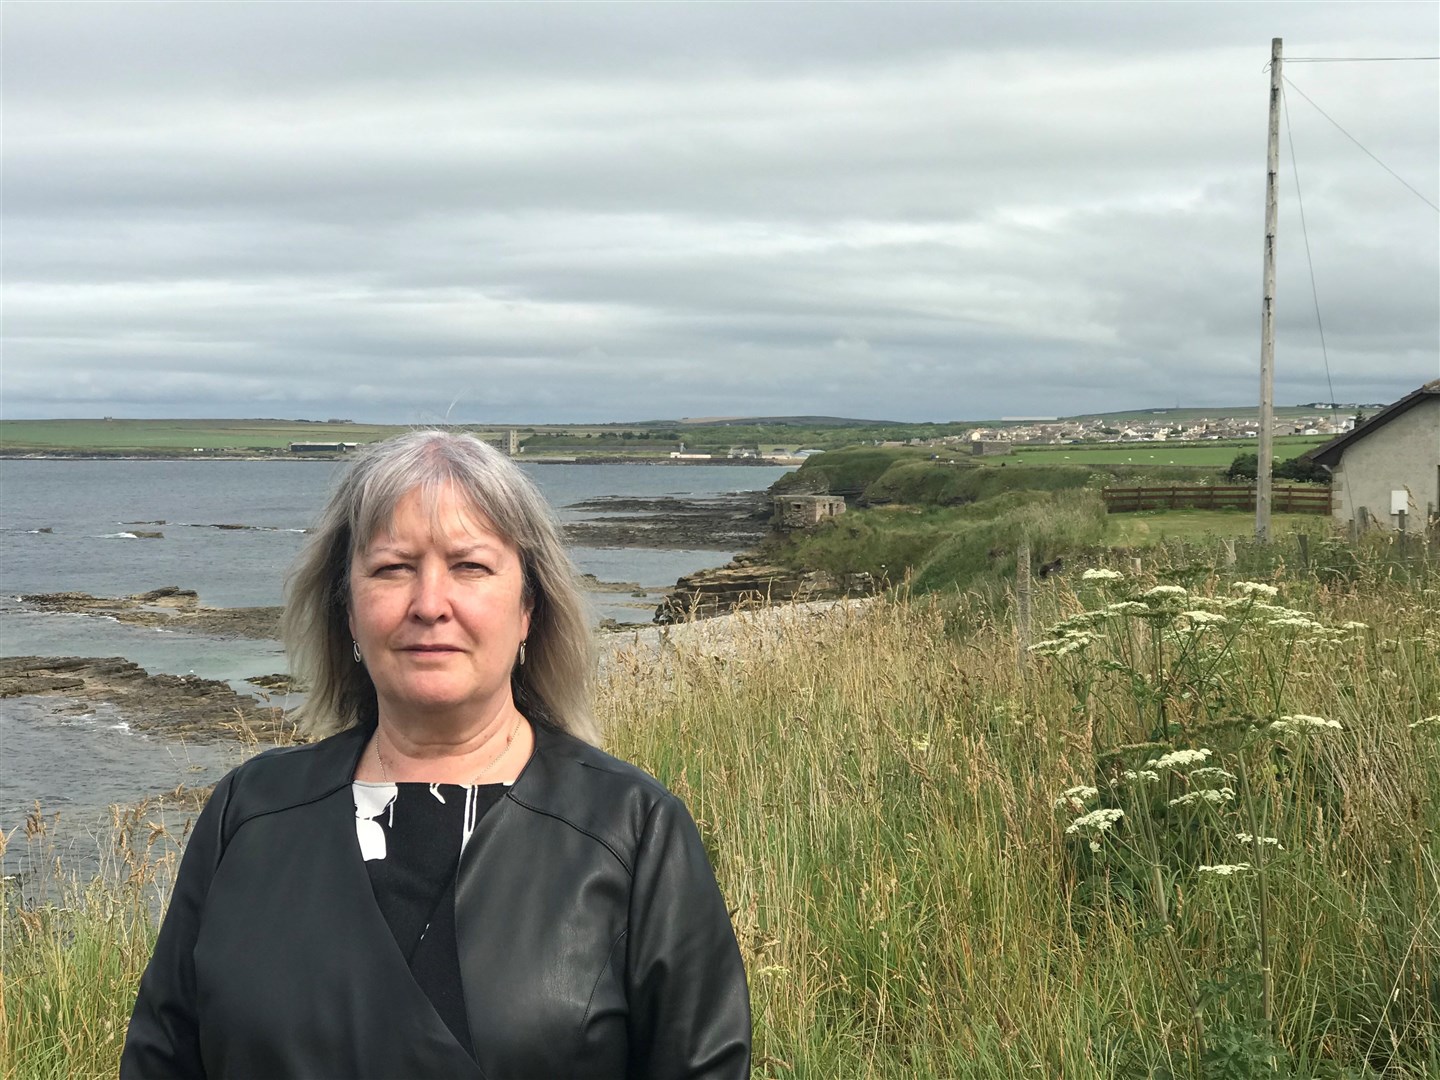 Rhoda Grant MSP: 'In the Highlands and Islands, we already pay more for food, transport and energy because of our geography – this is well documented. This 'Rural Tax' has long been recognised by residents.'